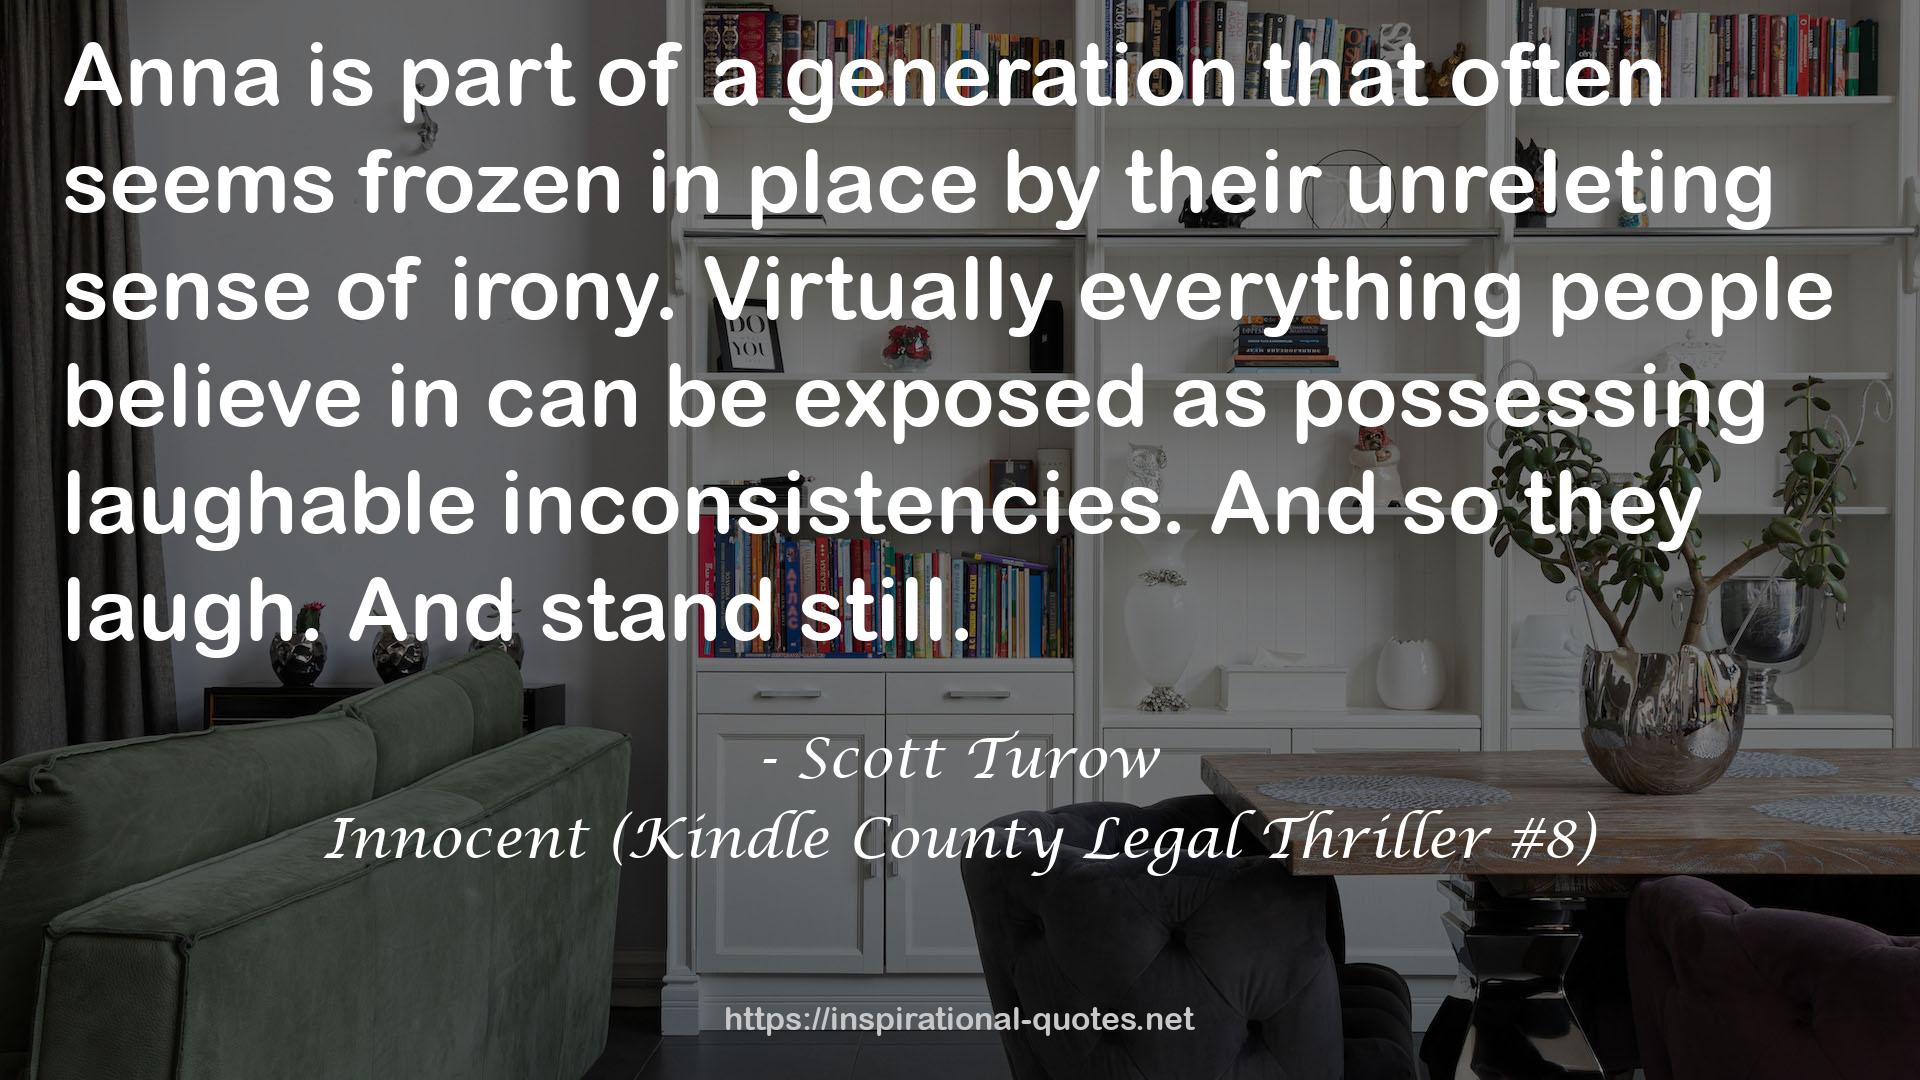 Innocent (Kindle County Legal Thriller #8) QUOTES